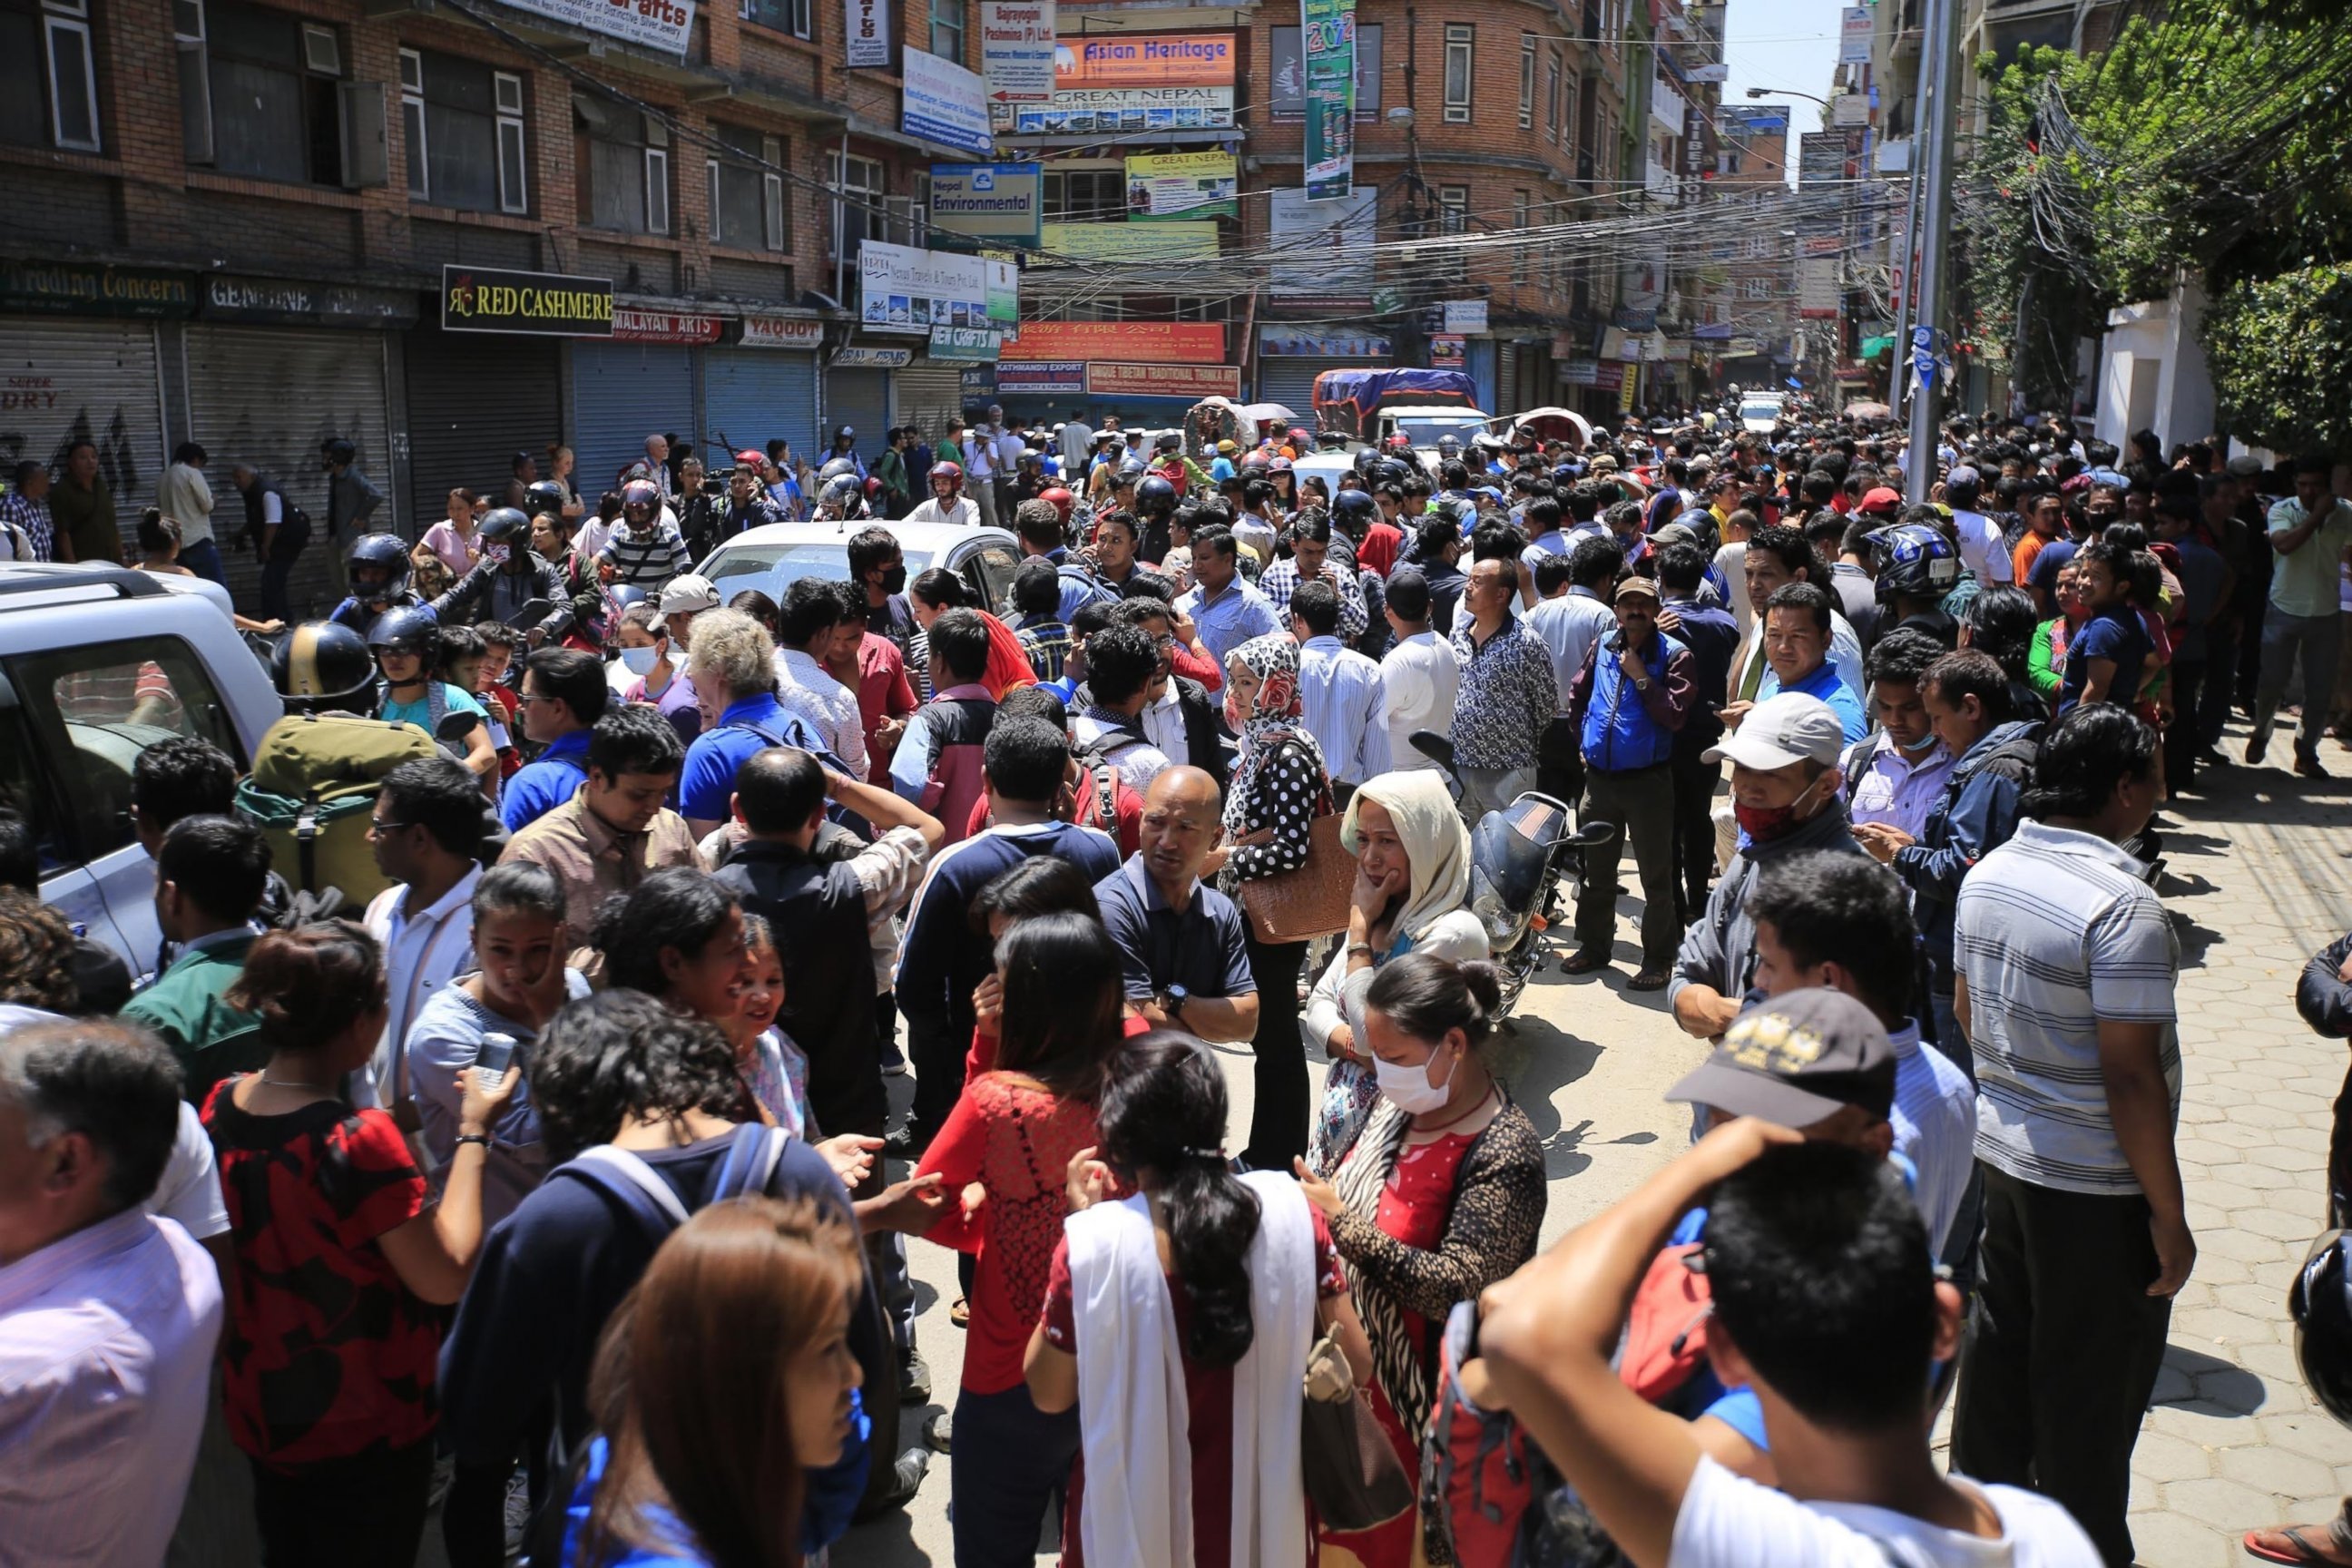 PHOTO: People run into the streets after a magnitude 7.3 earthquake hit Nepal as the country recovers from last month's devastating earthquake, in Kathmandu, Nepal, on May 12, 2015.